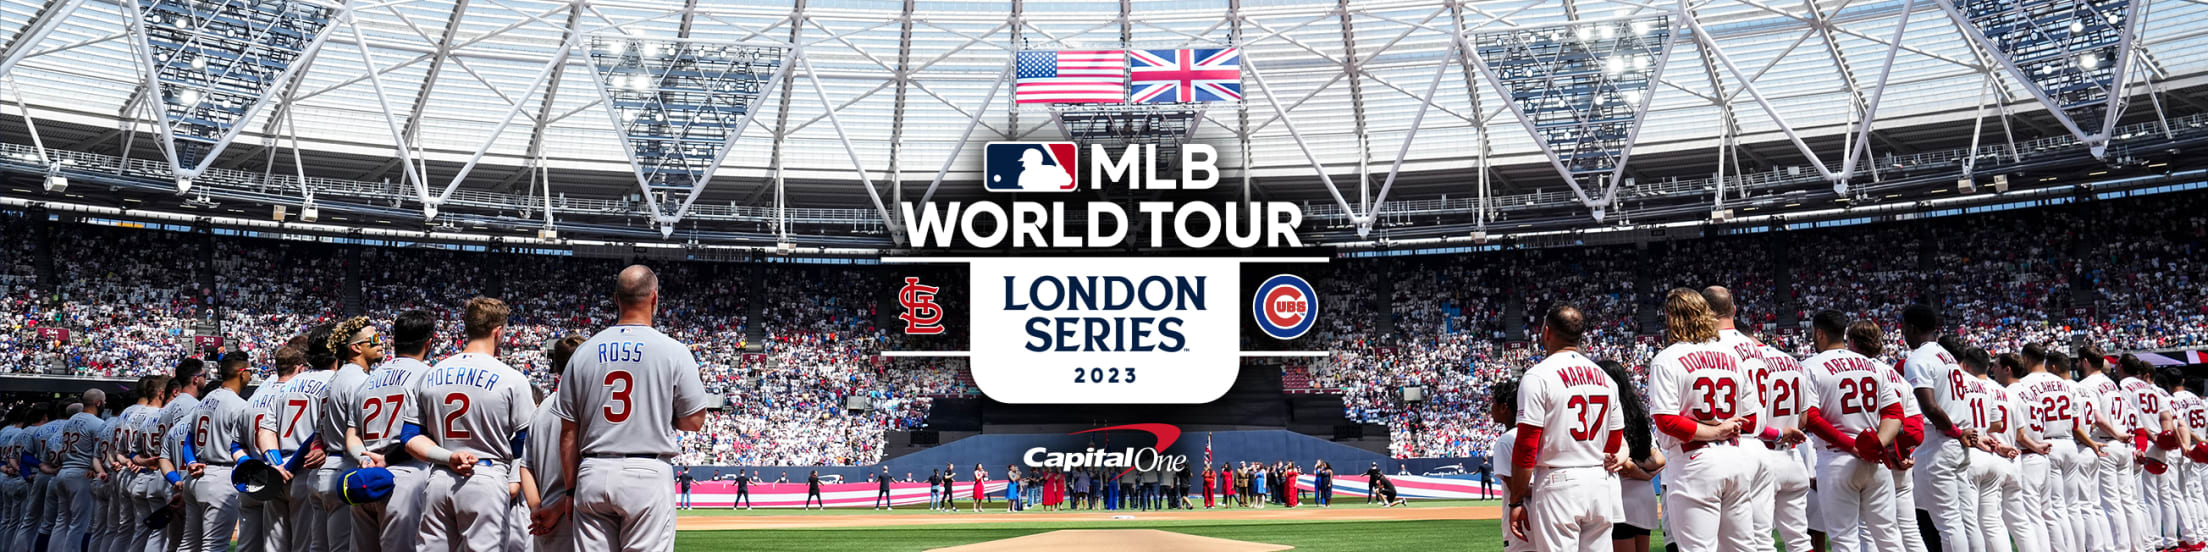 MLB London Series 2023 best moments Game 1